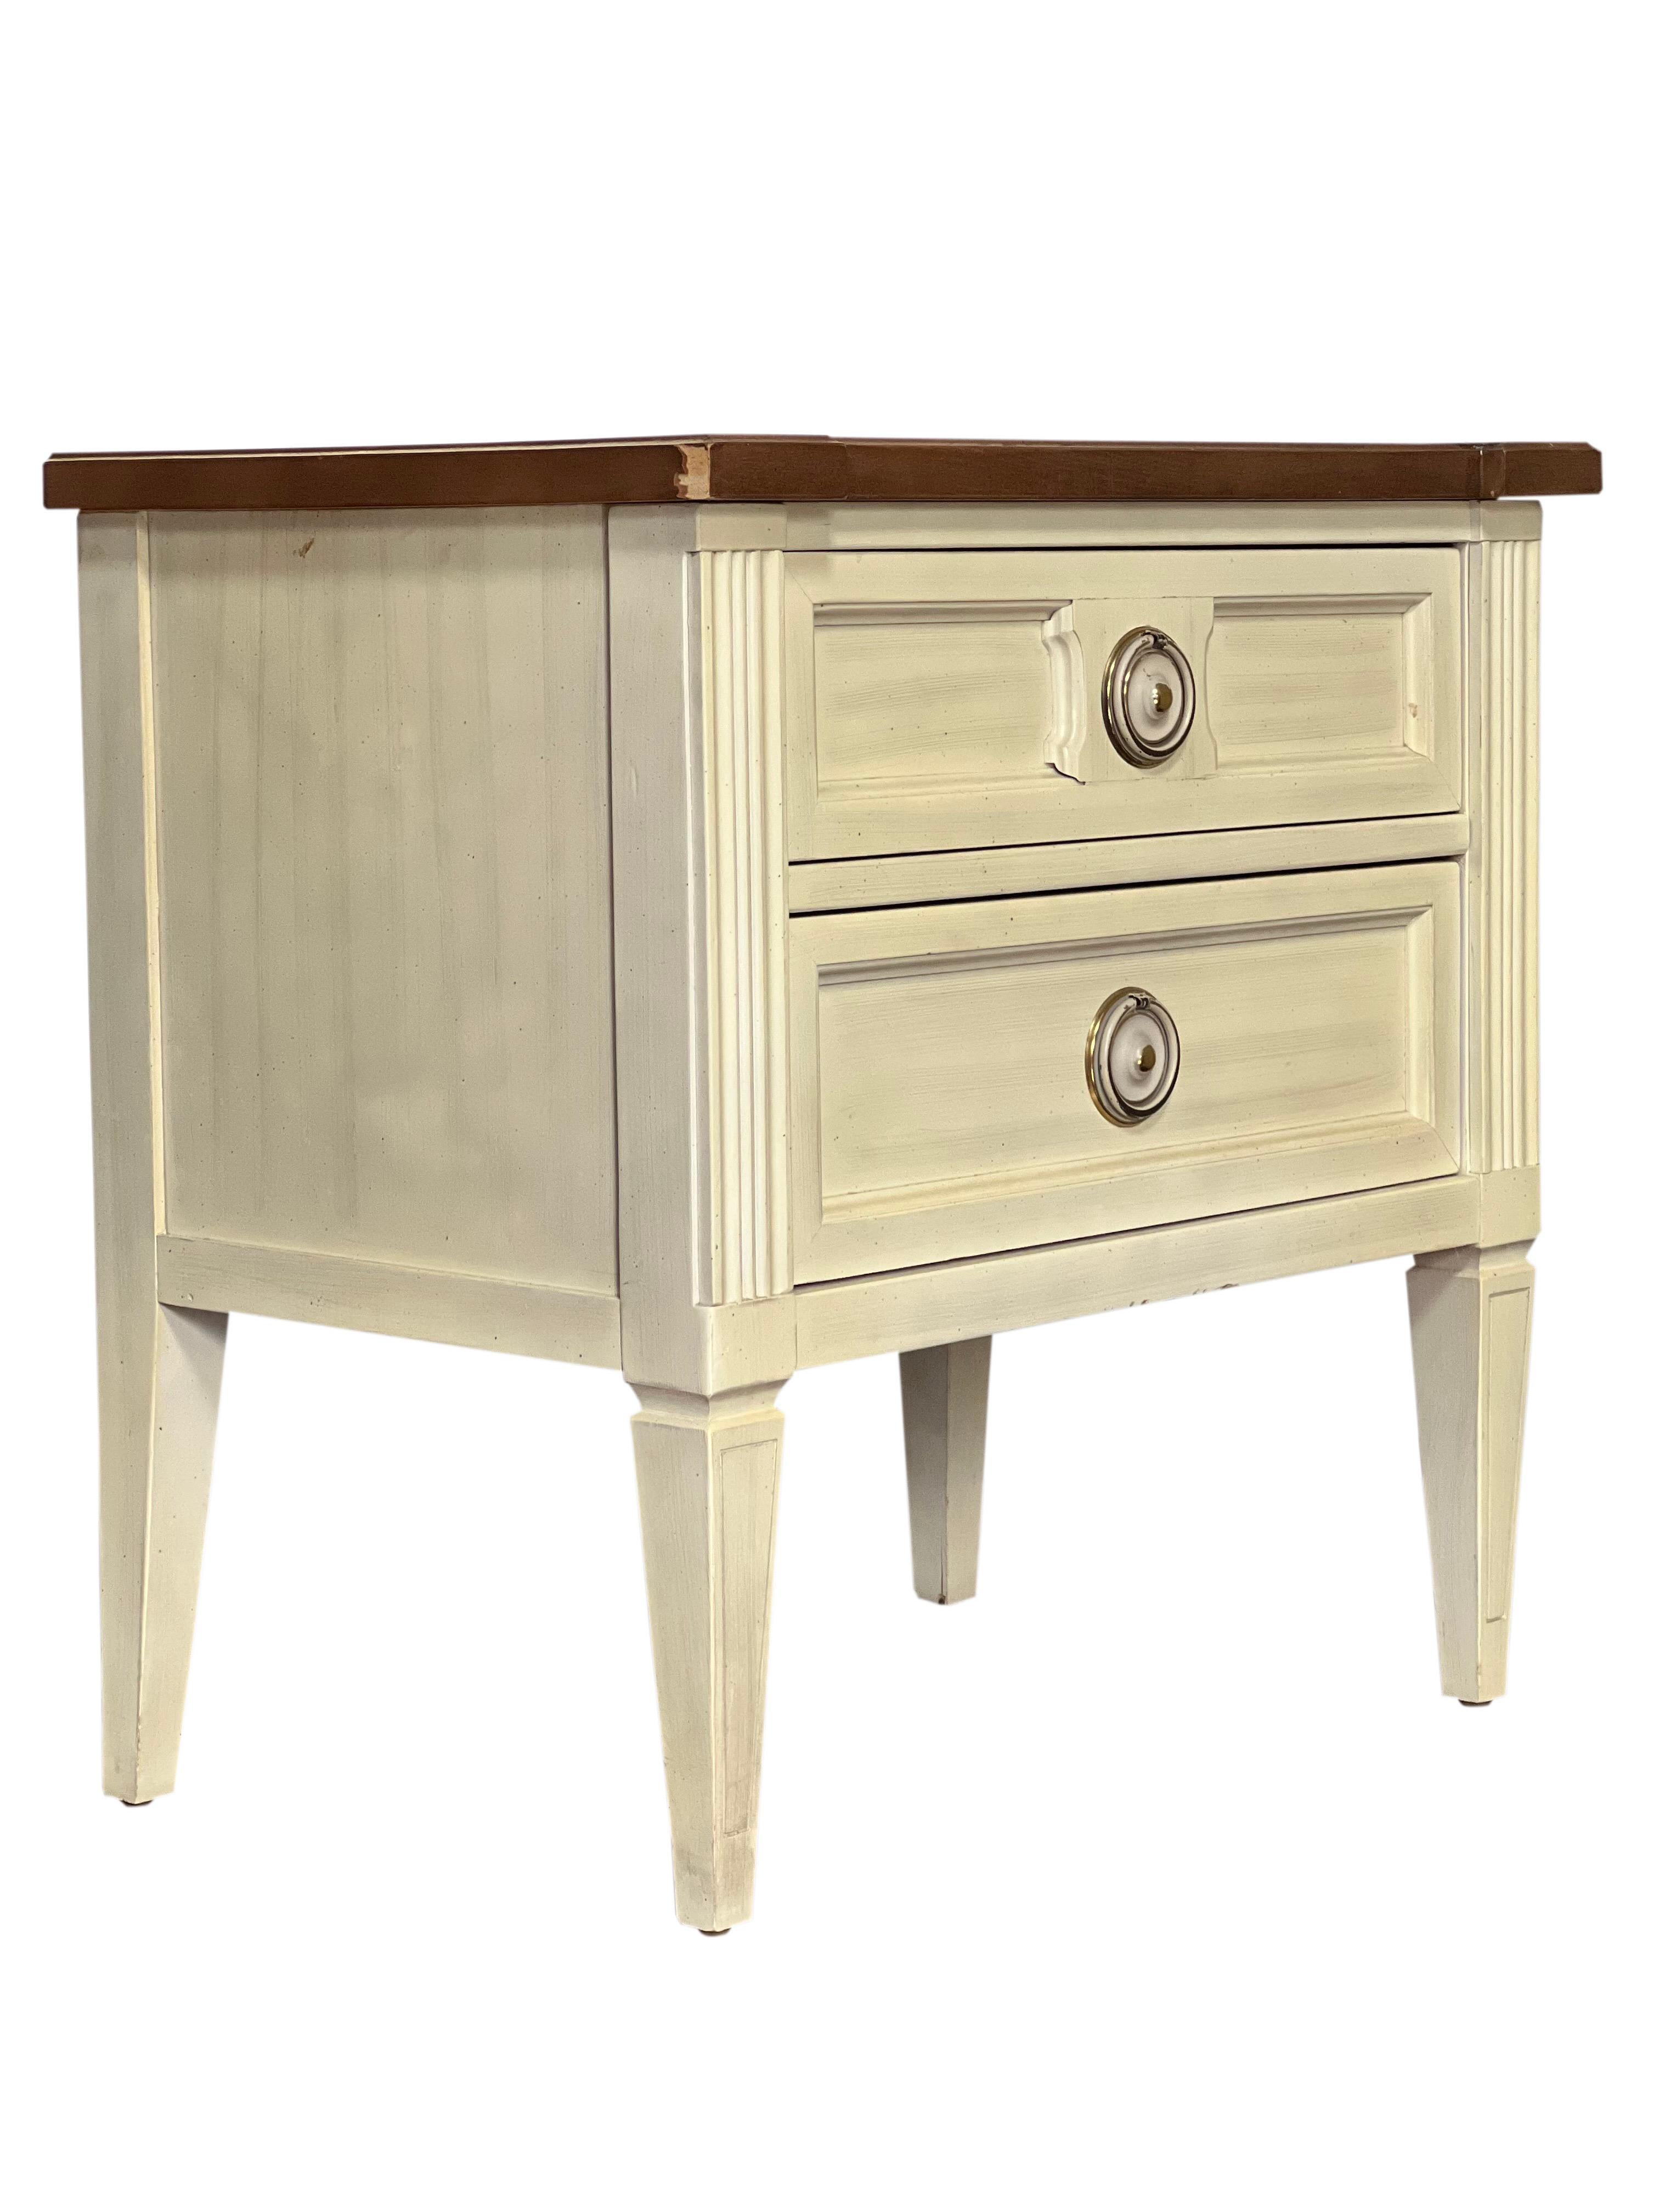 Brass American of Martinsville Parquet Top White Nightstands, a Pair For Sale